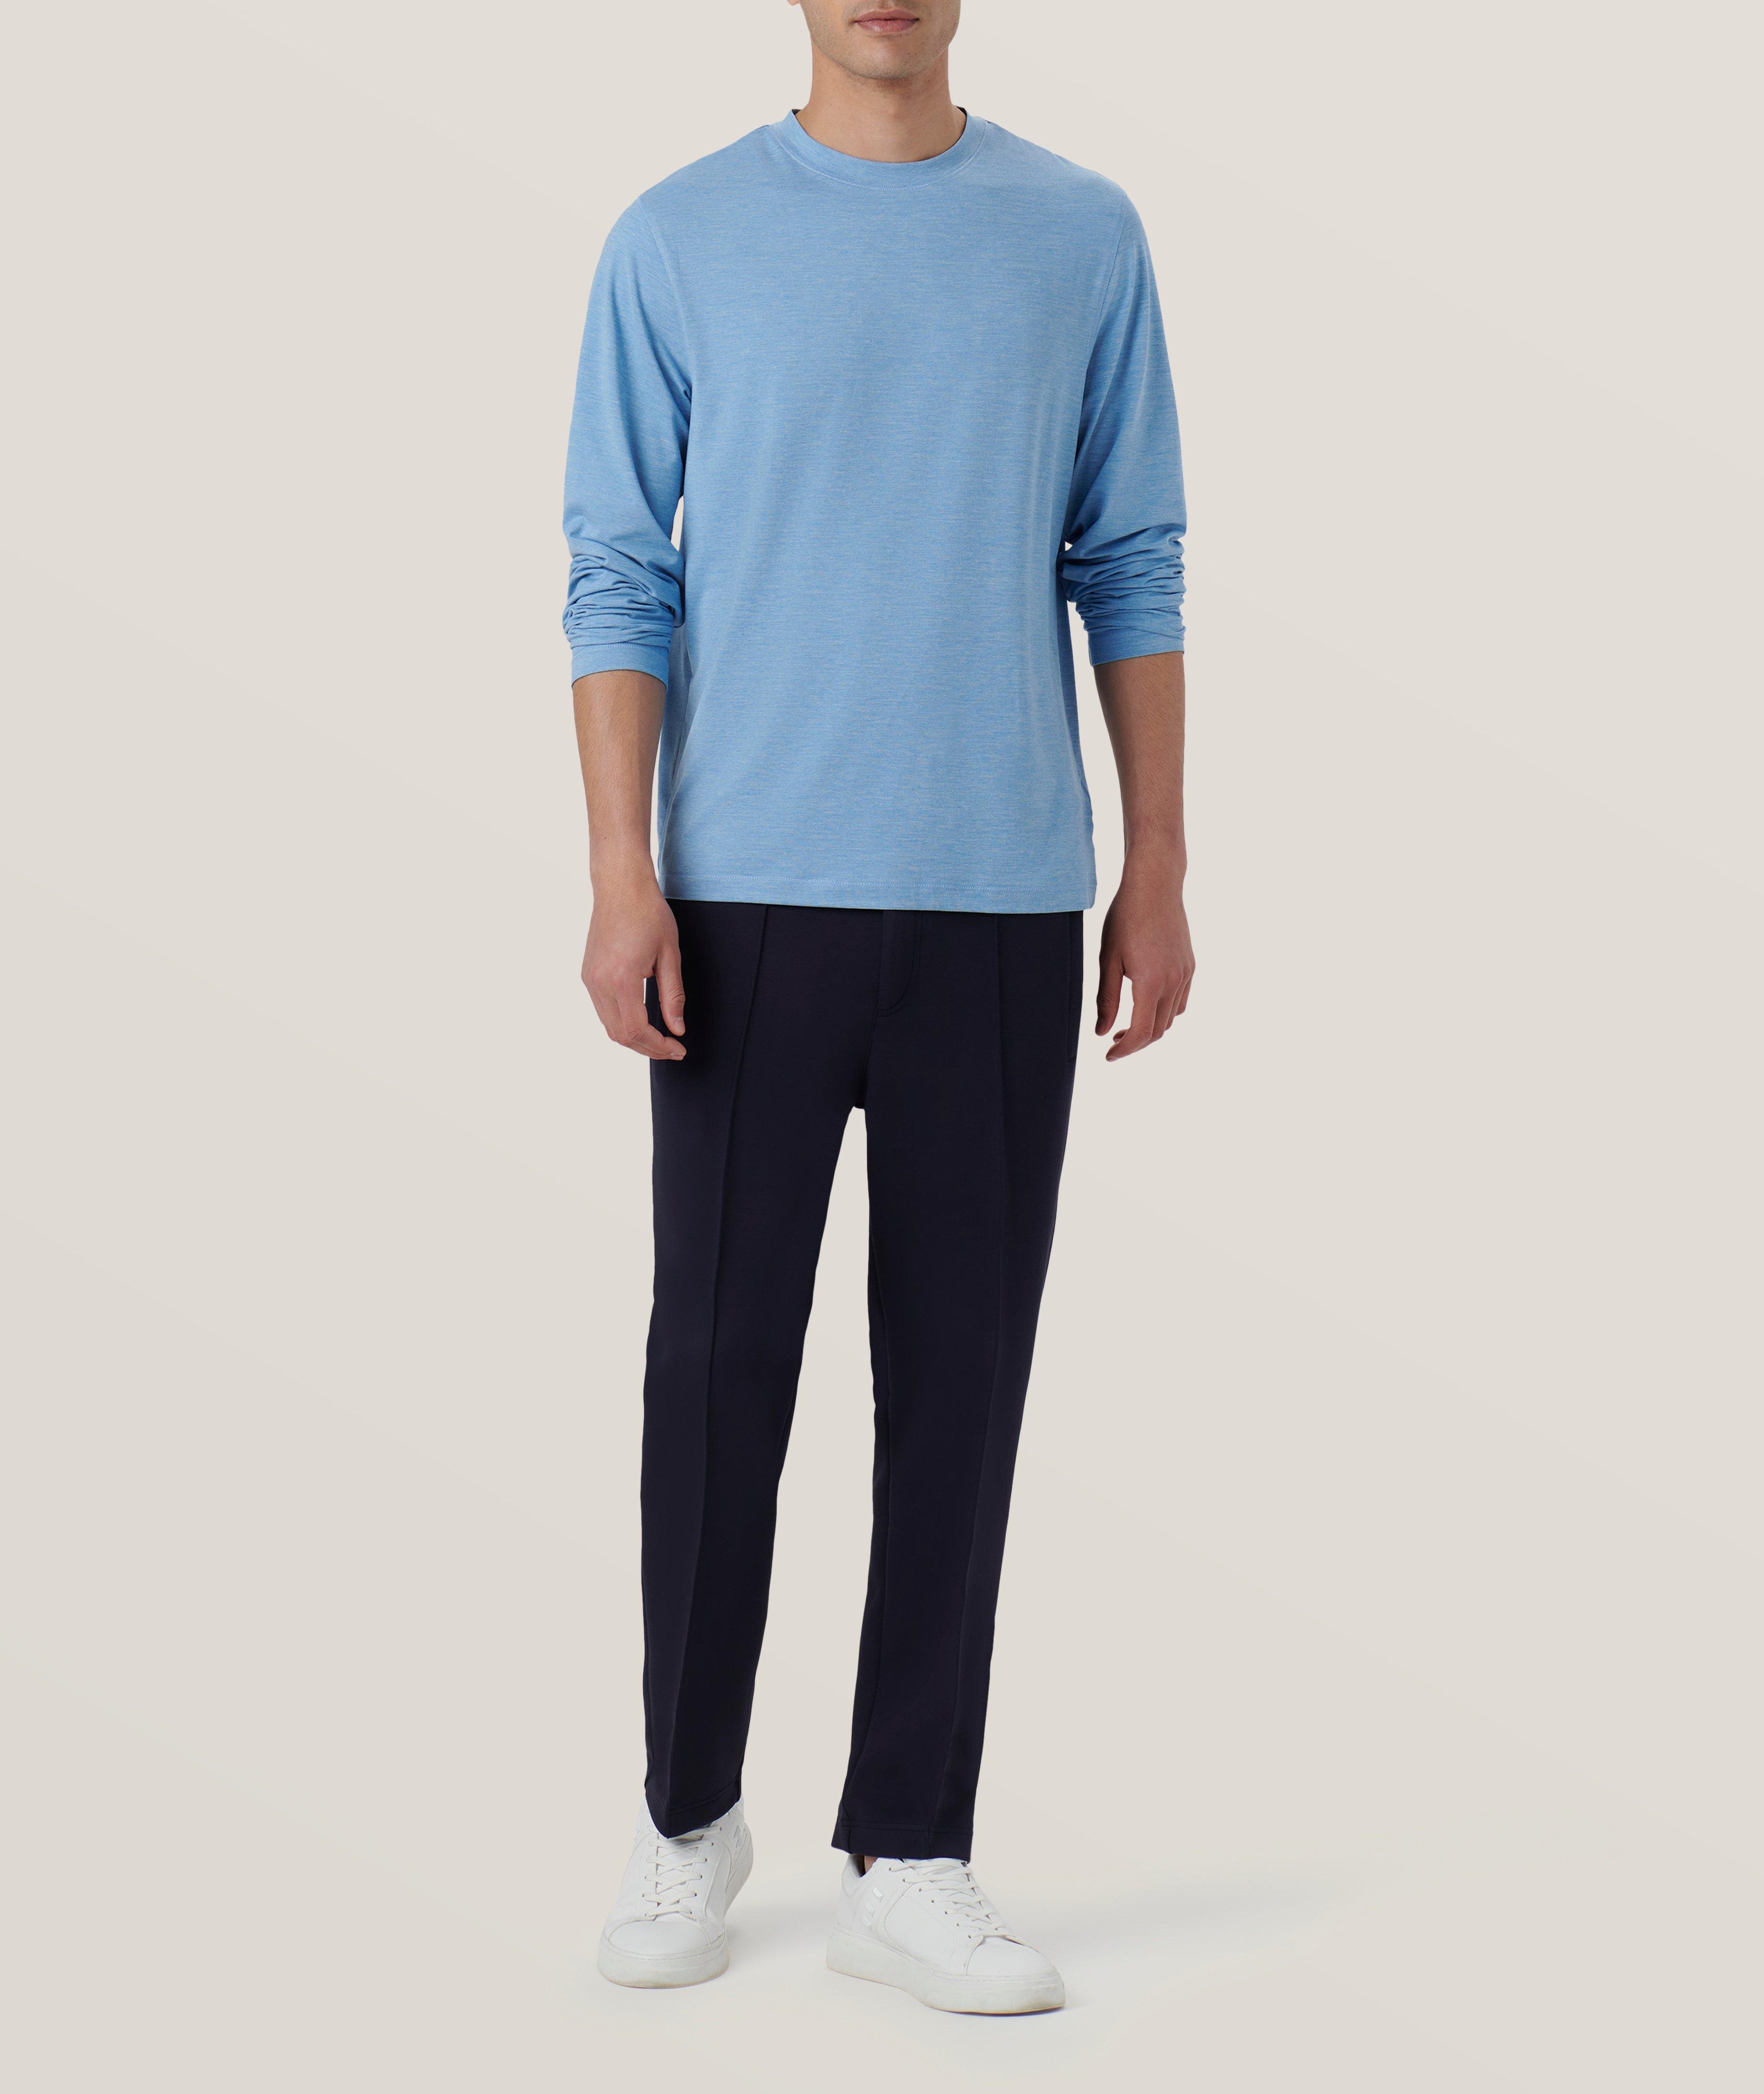 4-Way Stretch UV50 Performance Pullover image 5